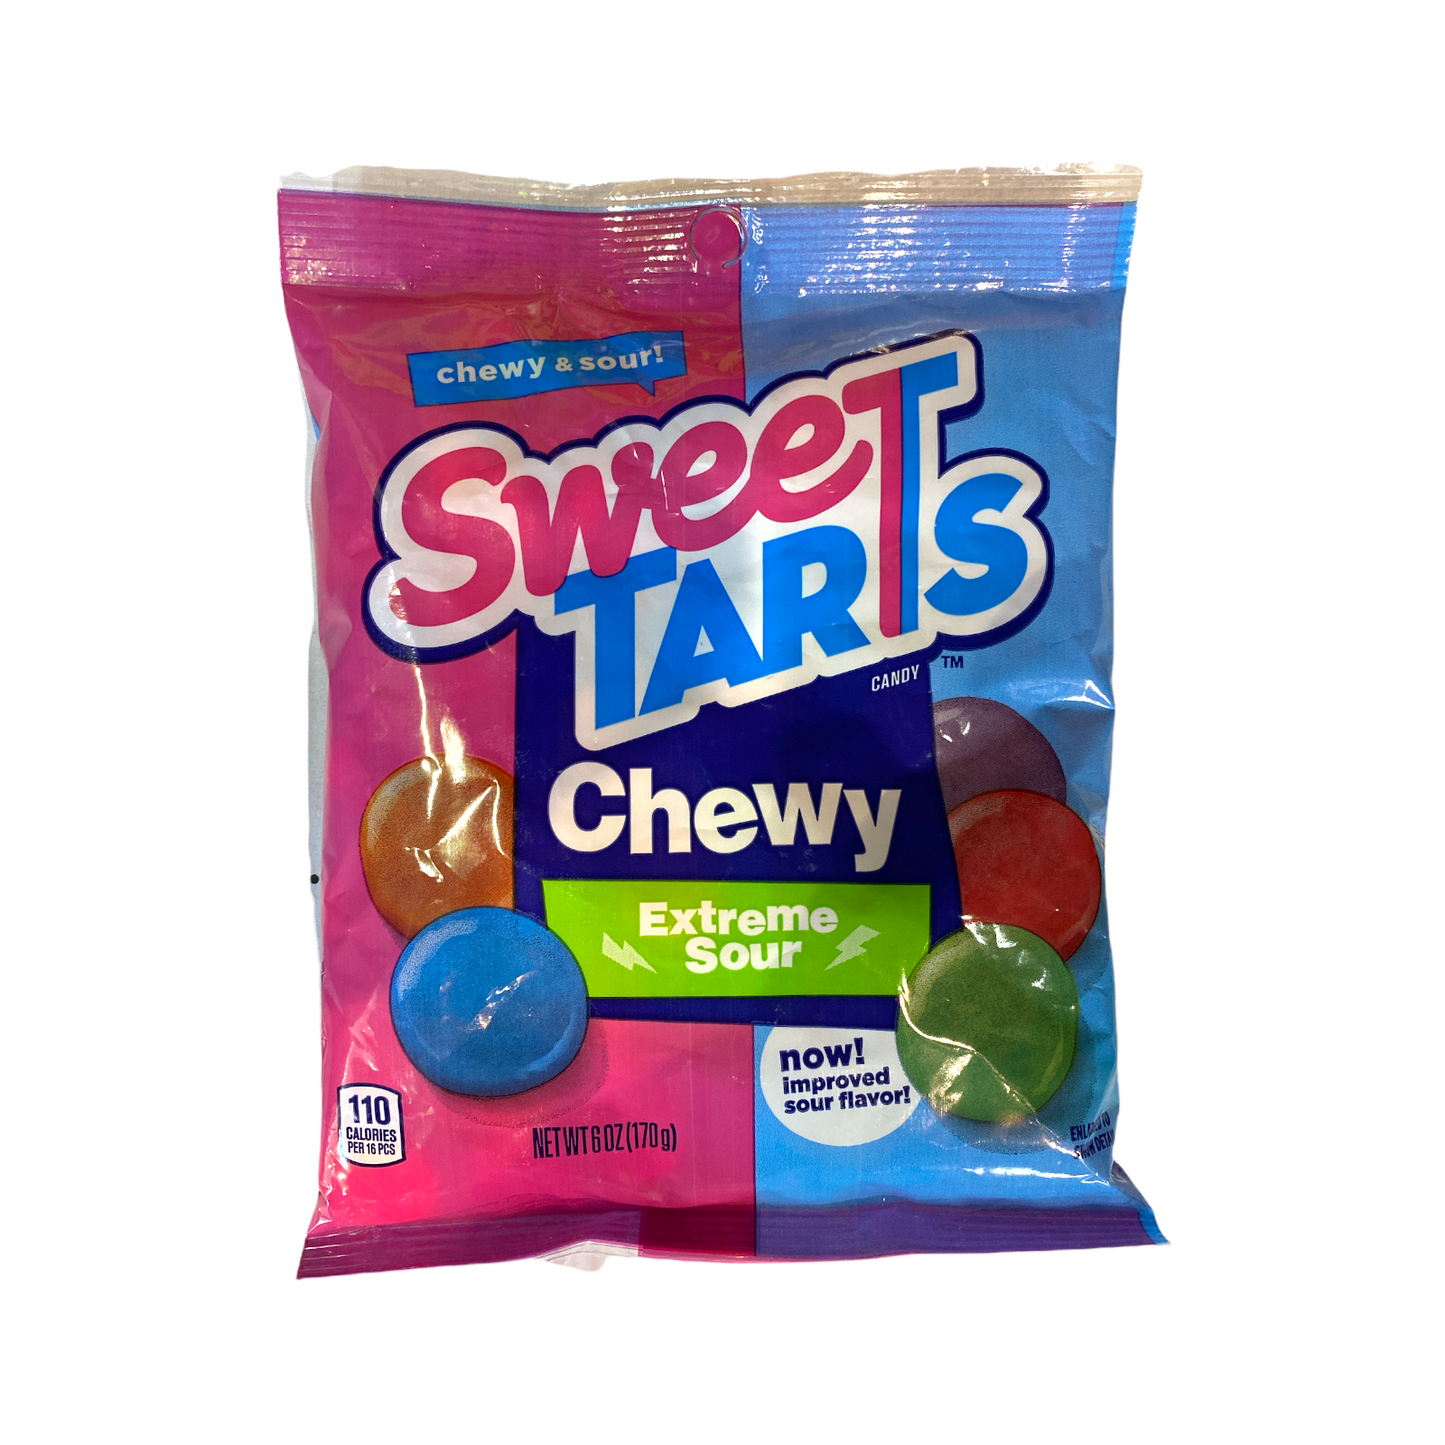 SweeTarts Chewy Extreme Sours - 6oz (170g)